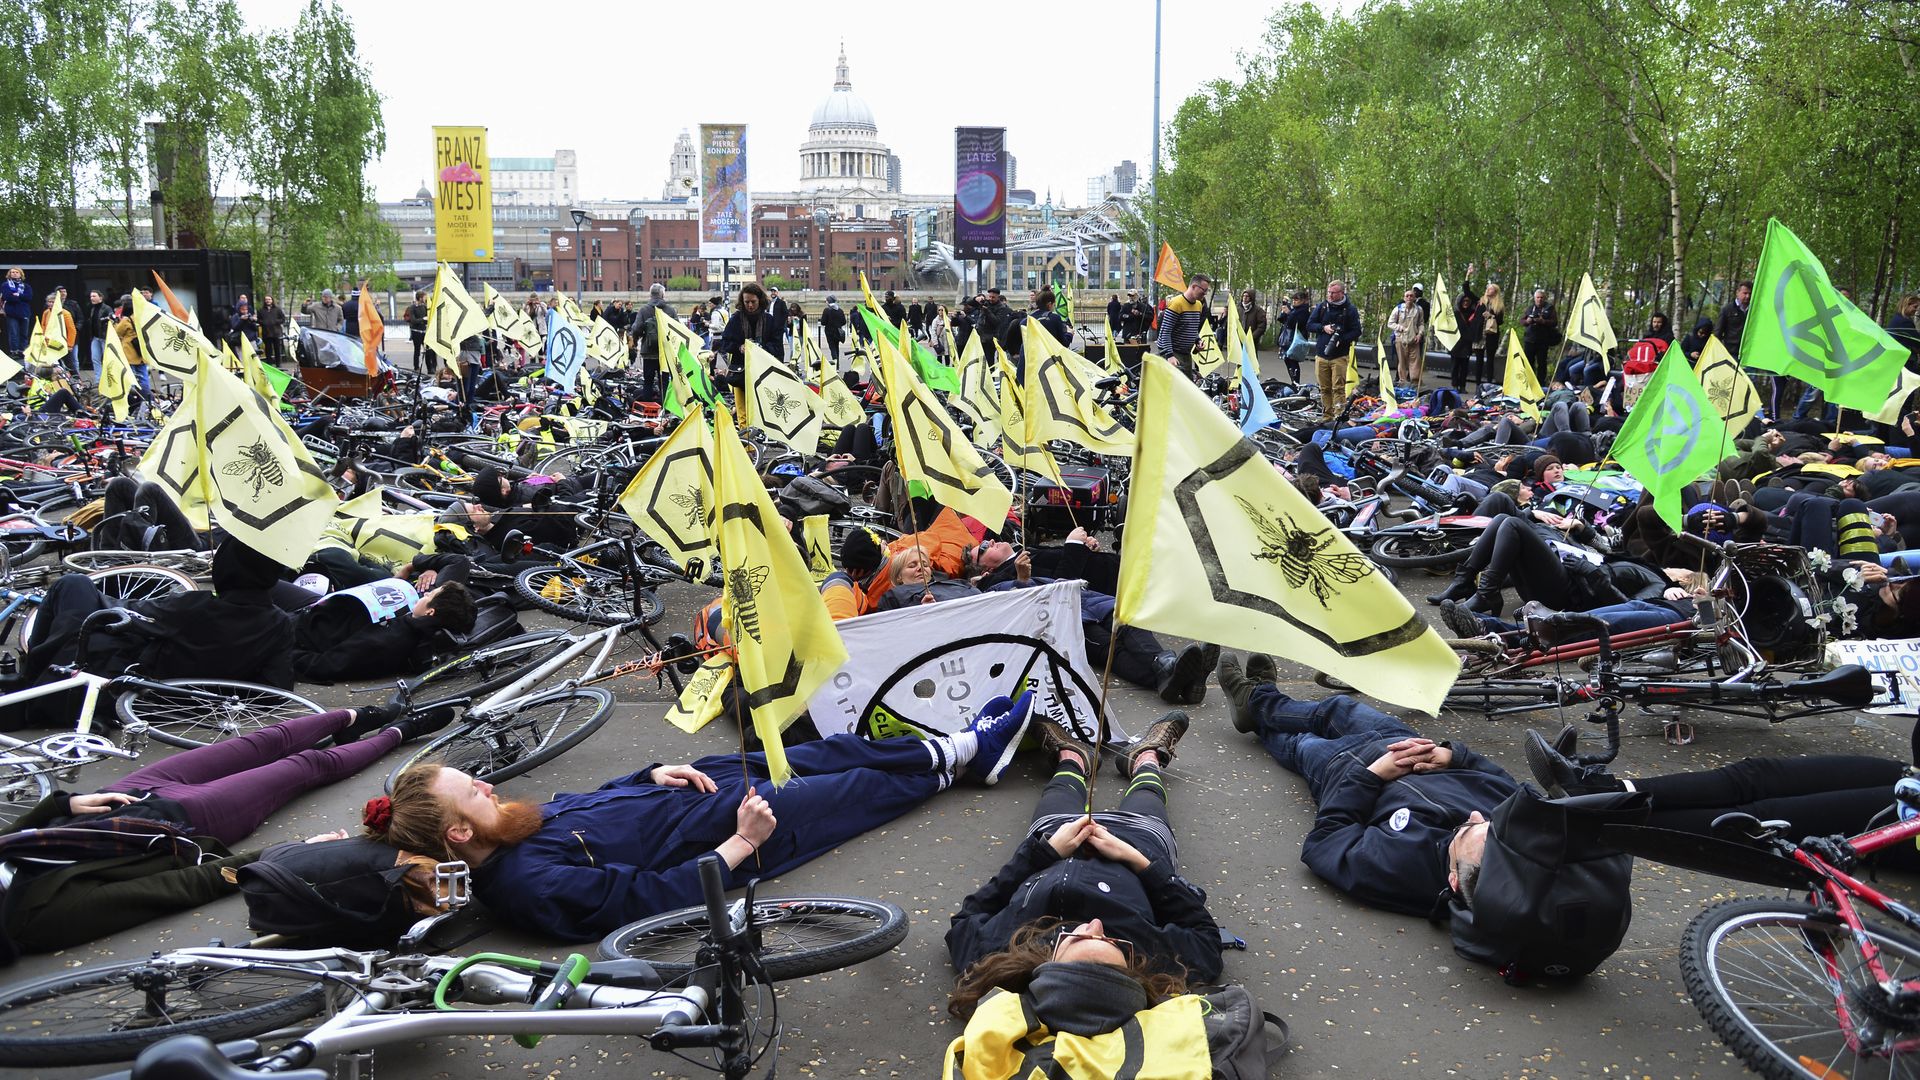 Extinction Rebellion protests April 27 in front of UK Parliament building. Photo: Claire Doherty/In Pictures via Getty Images